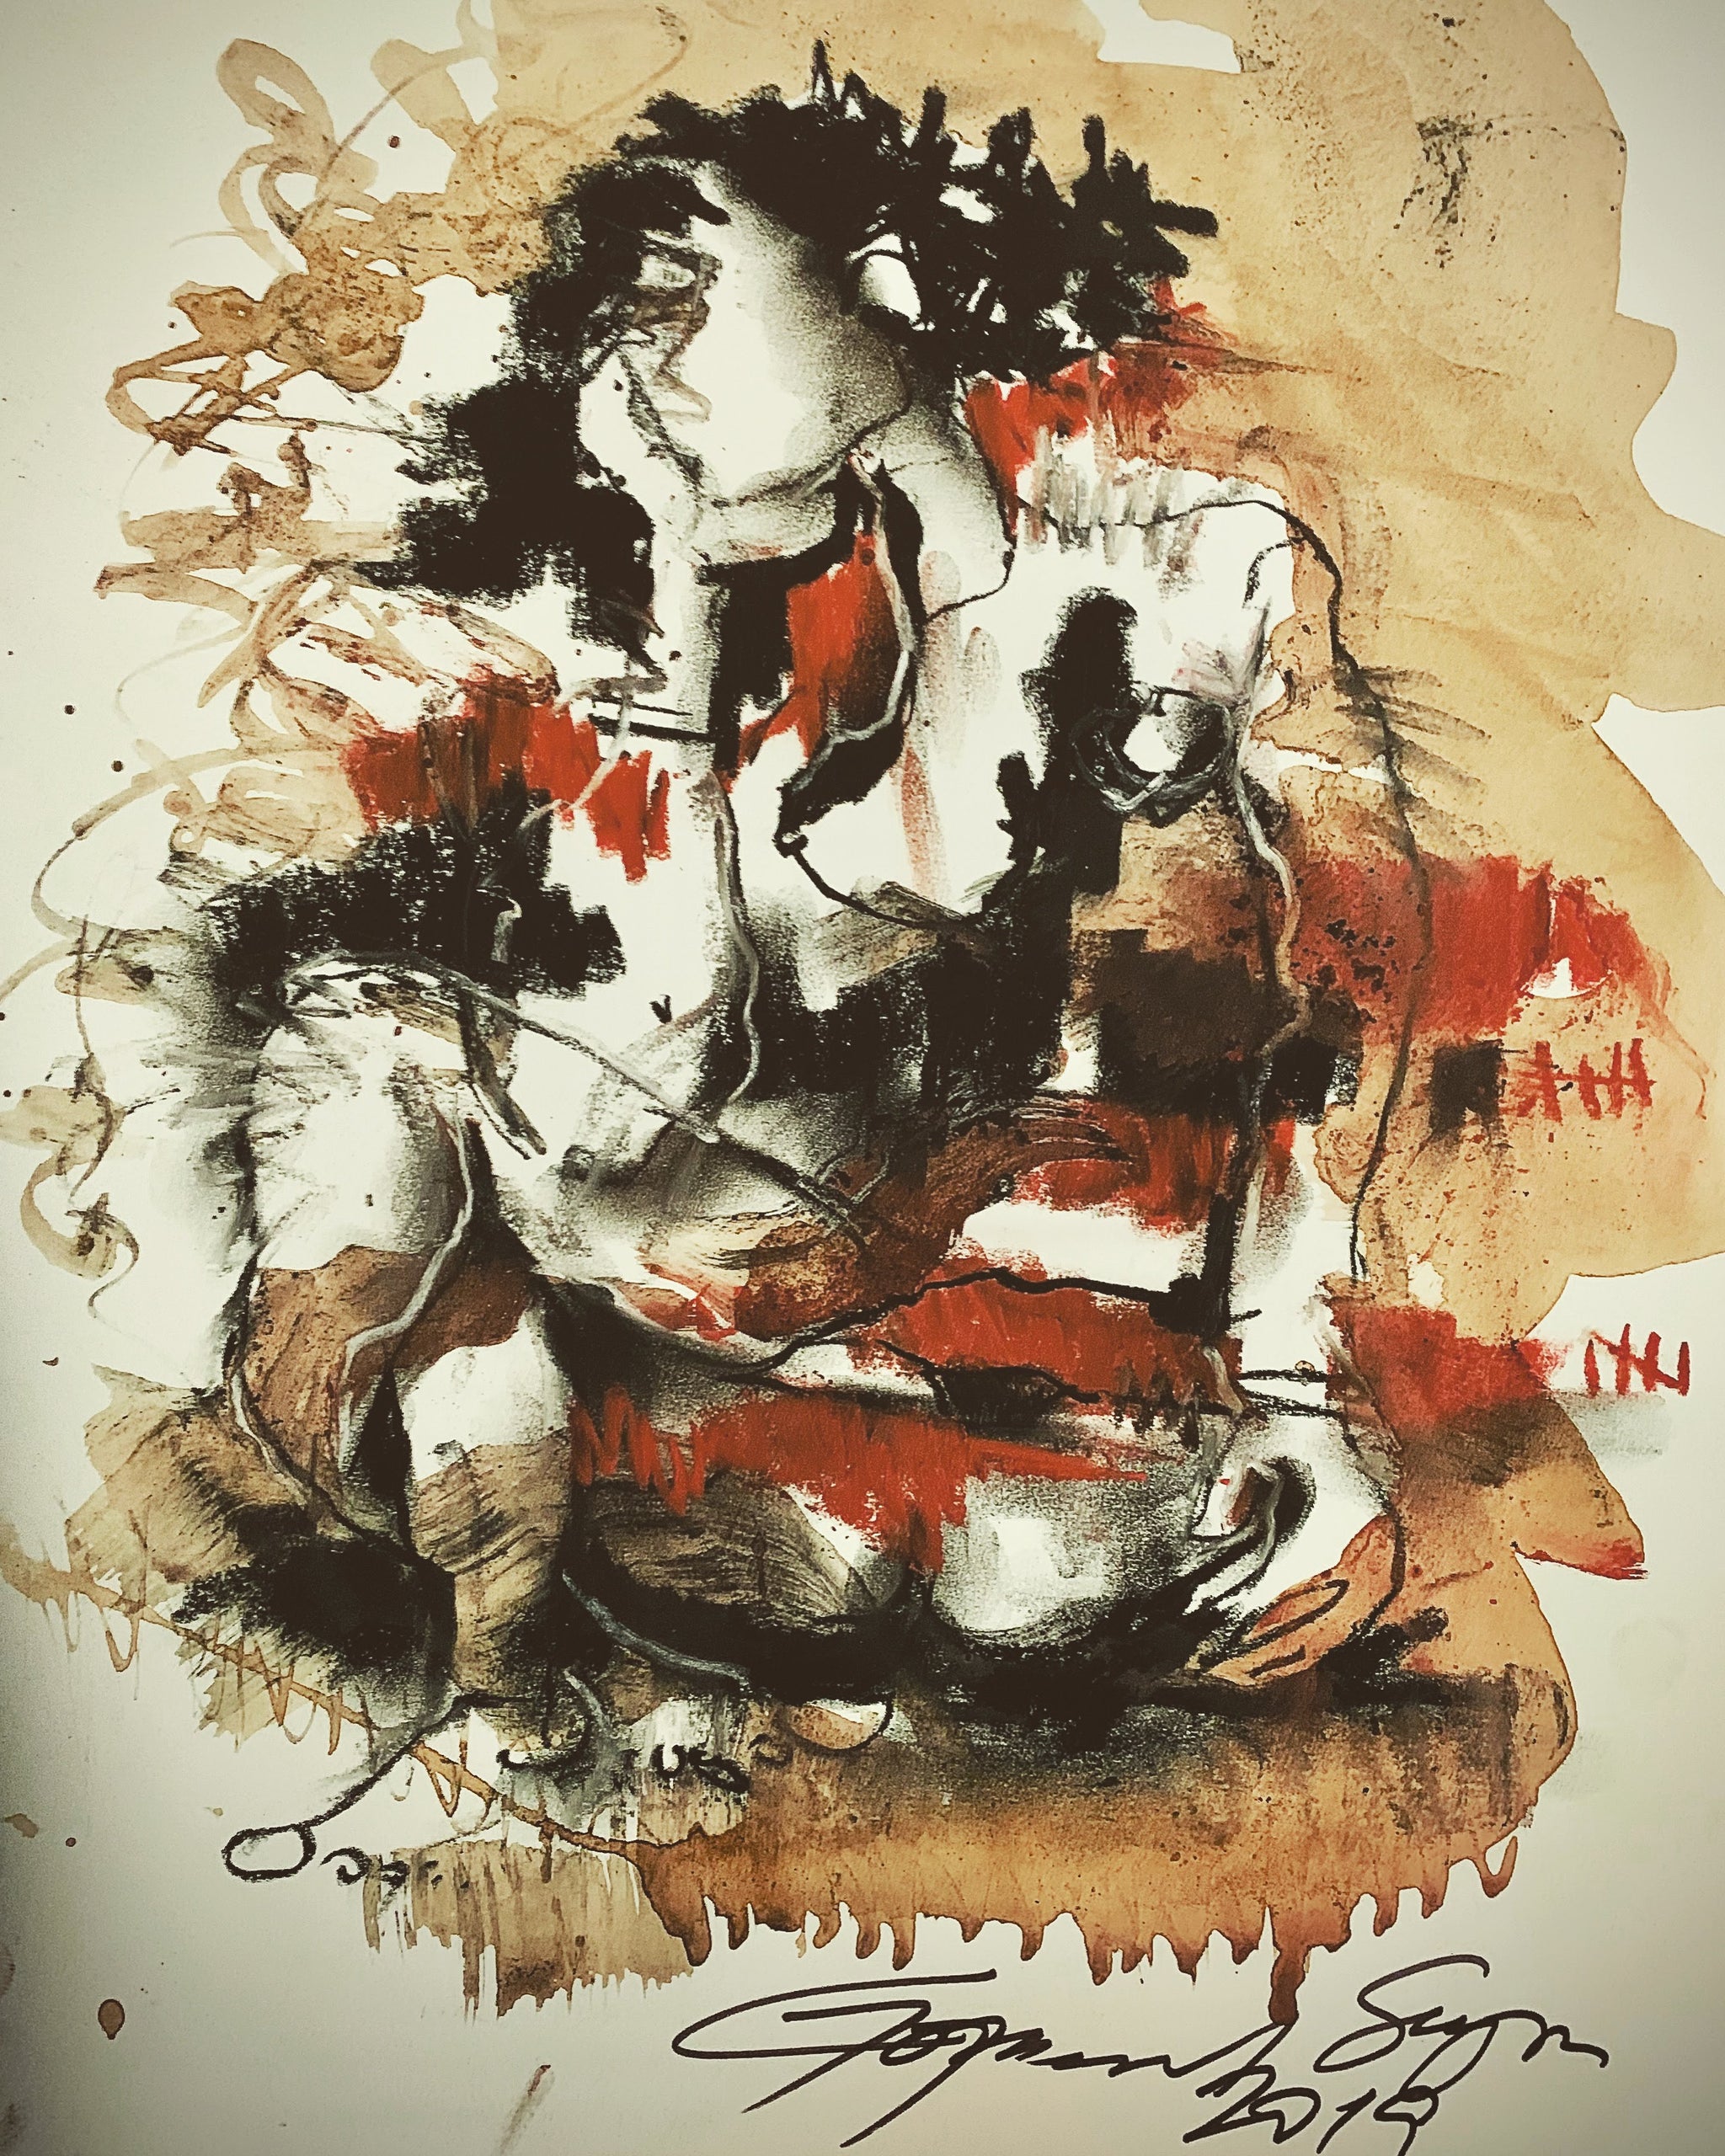 Buy Coffee Series Painting the original Ink, Charcoal and Pastel on Paper artwork by Indian-American artist Gopaal Seyn | RedBlueArts.com